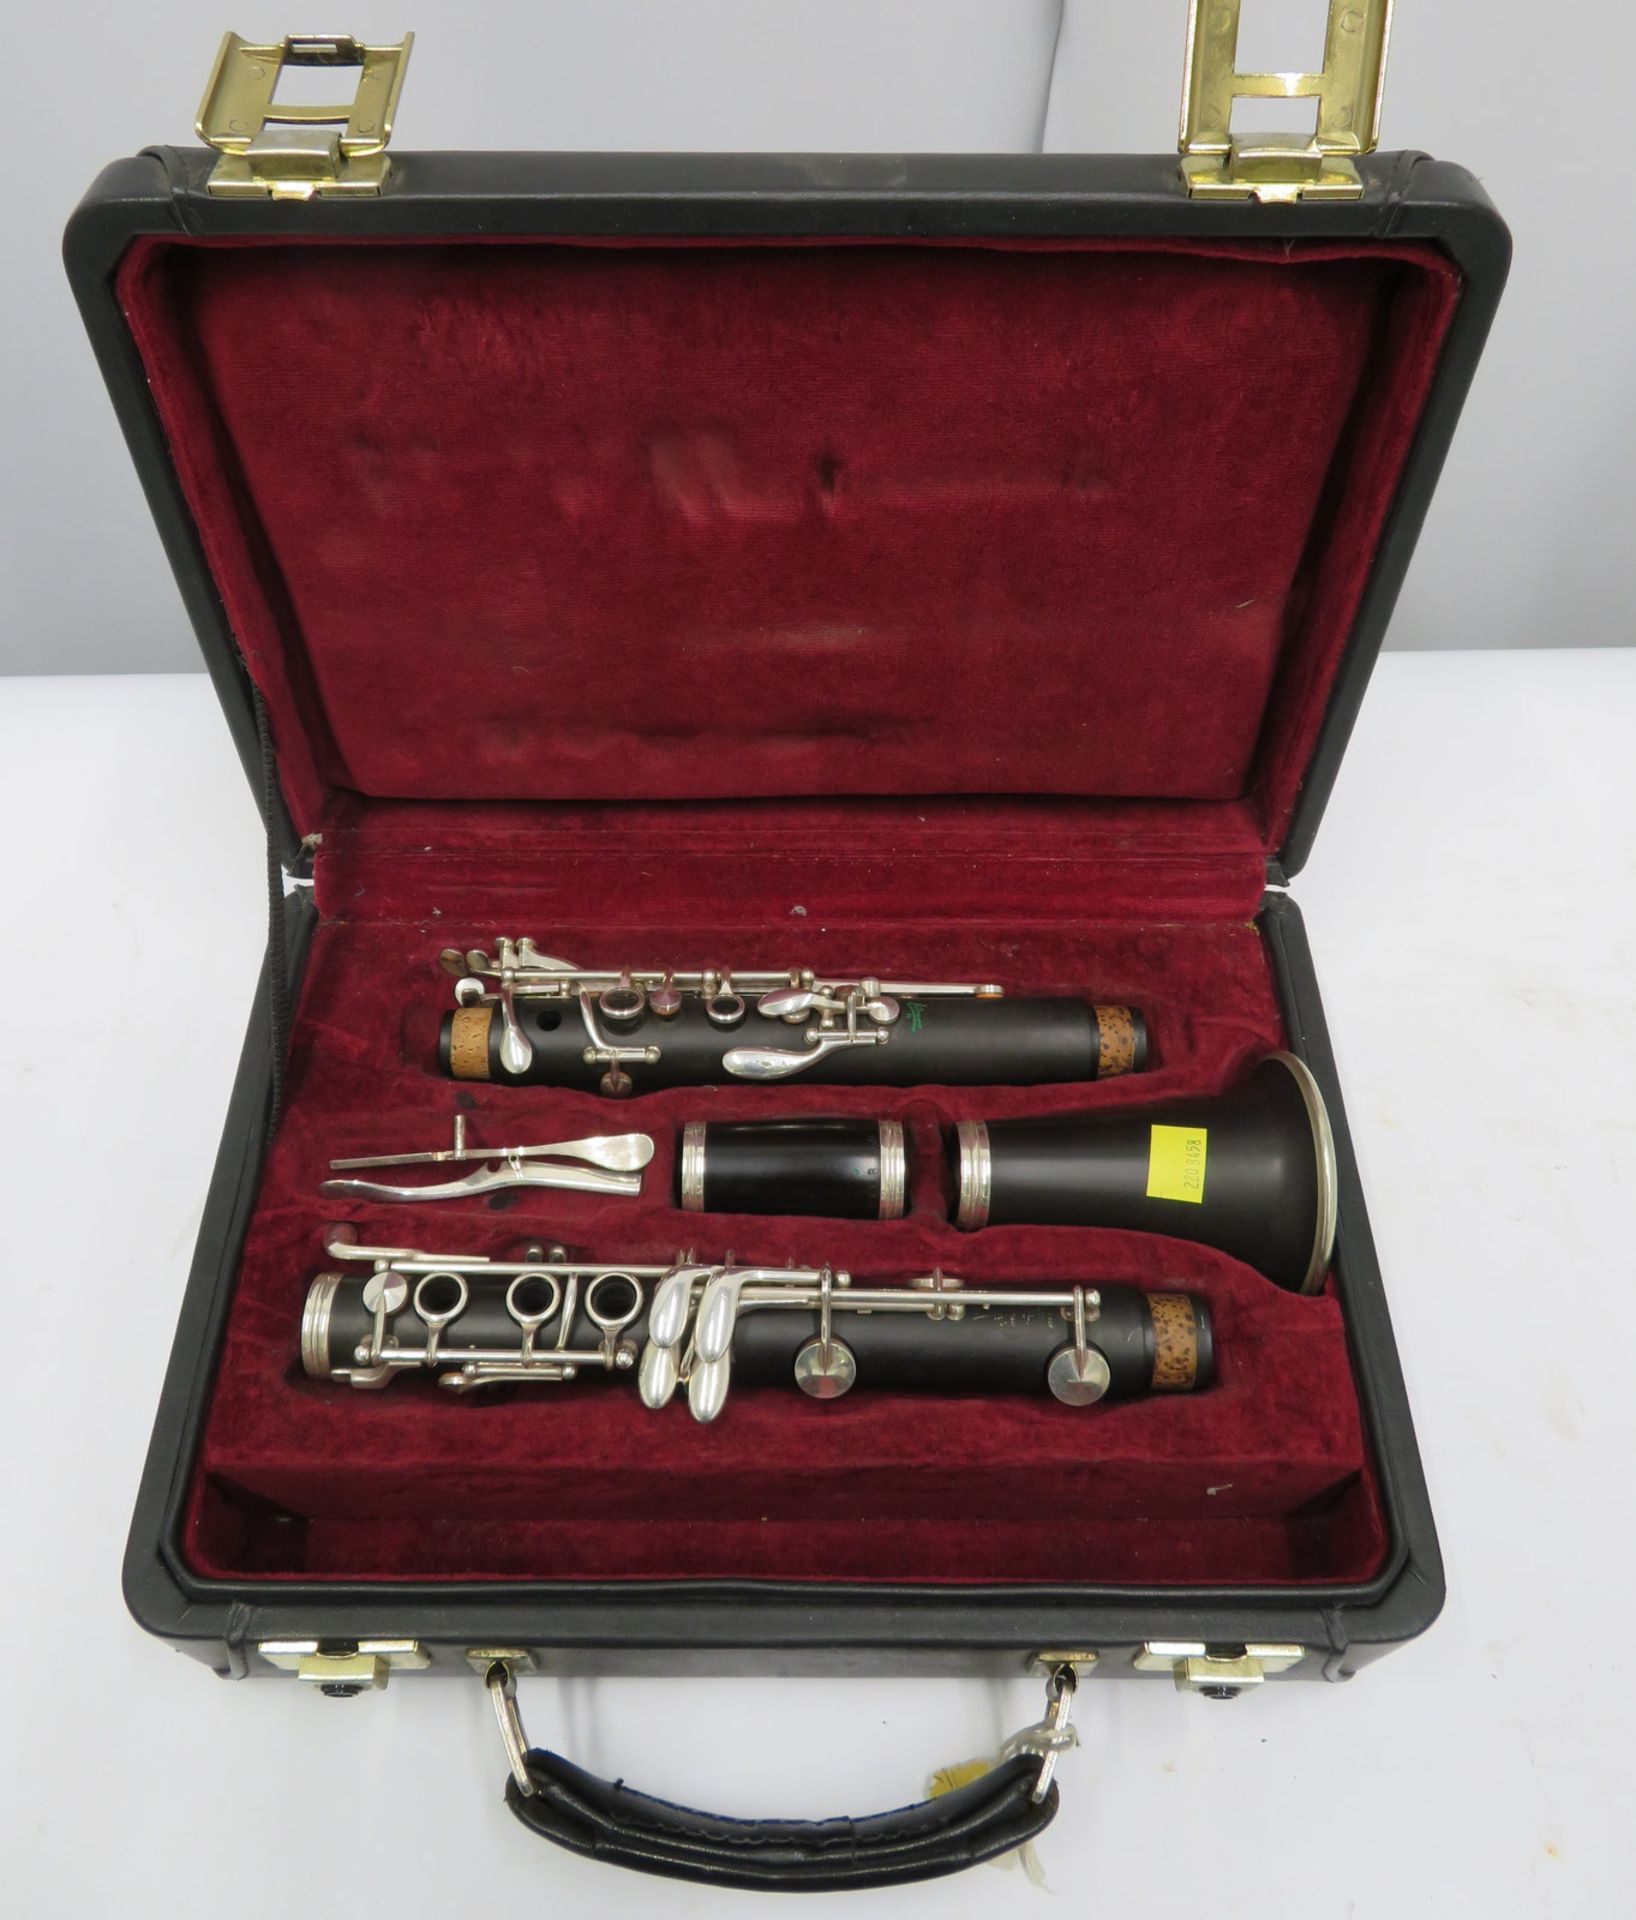 Buffet Crampon L Green clarinet with case. Serial number: 477678.